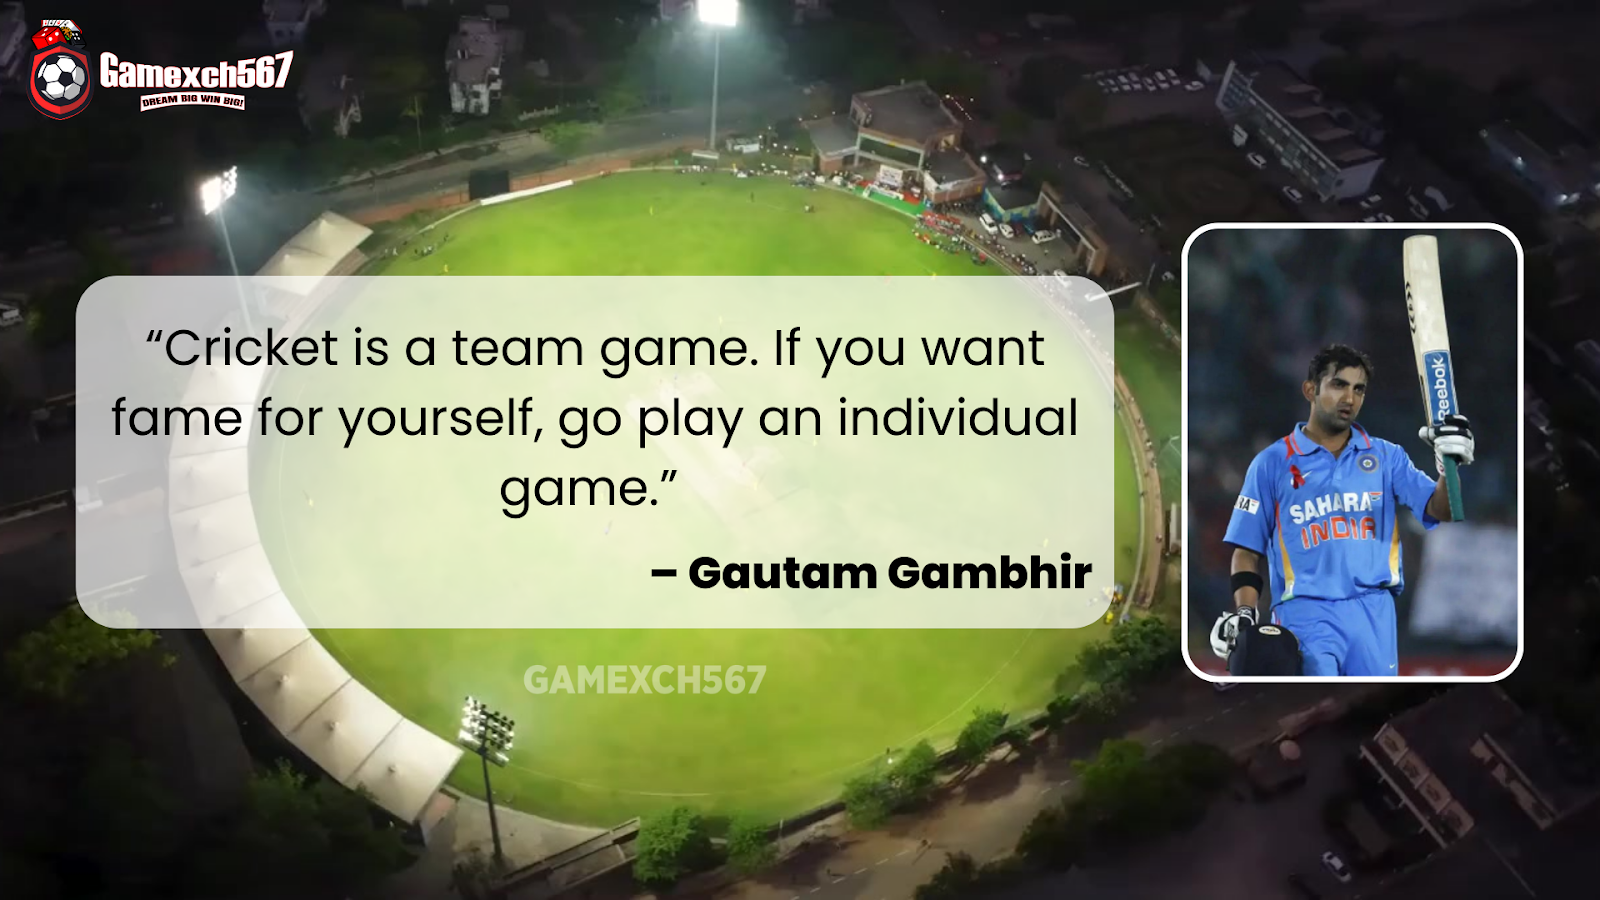 Quotes about cricket  - “Cricket is a team game. If you want fame for yourself, go play an individual game.” – Gautam Gambhir